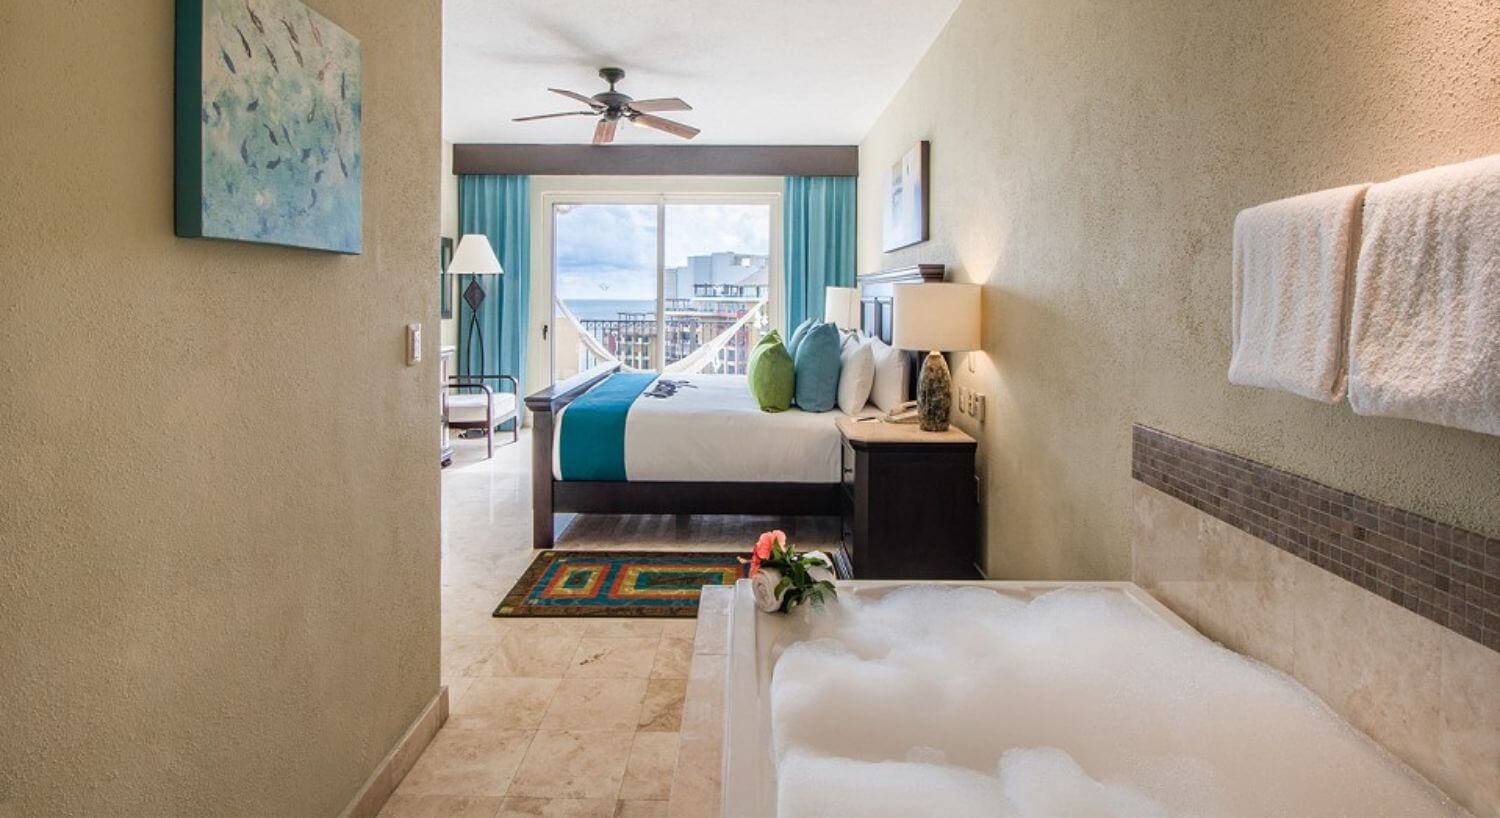 A bedroom with a King bed with white, brown and green bedding, nightstands with lamps on either side, an armchair and tall lamp in one corner, a deep tub with bubbles, and sliding doors that open to a private balcony with hammock, and views of the resort and ocean.